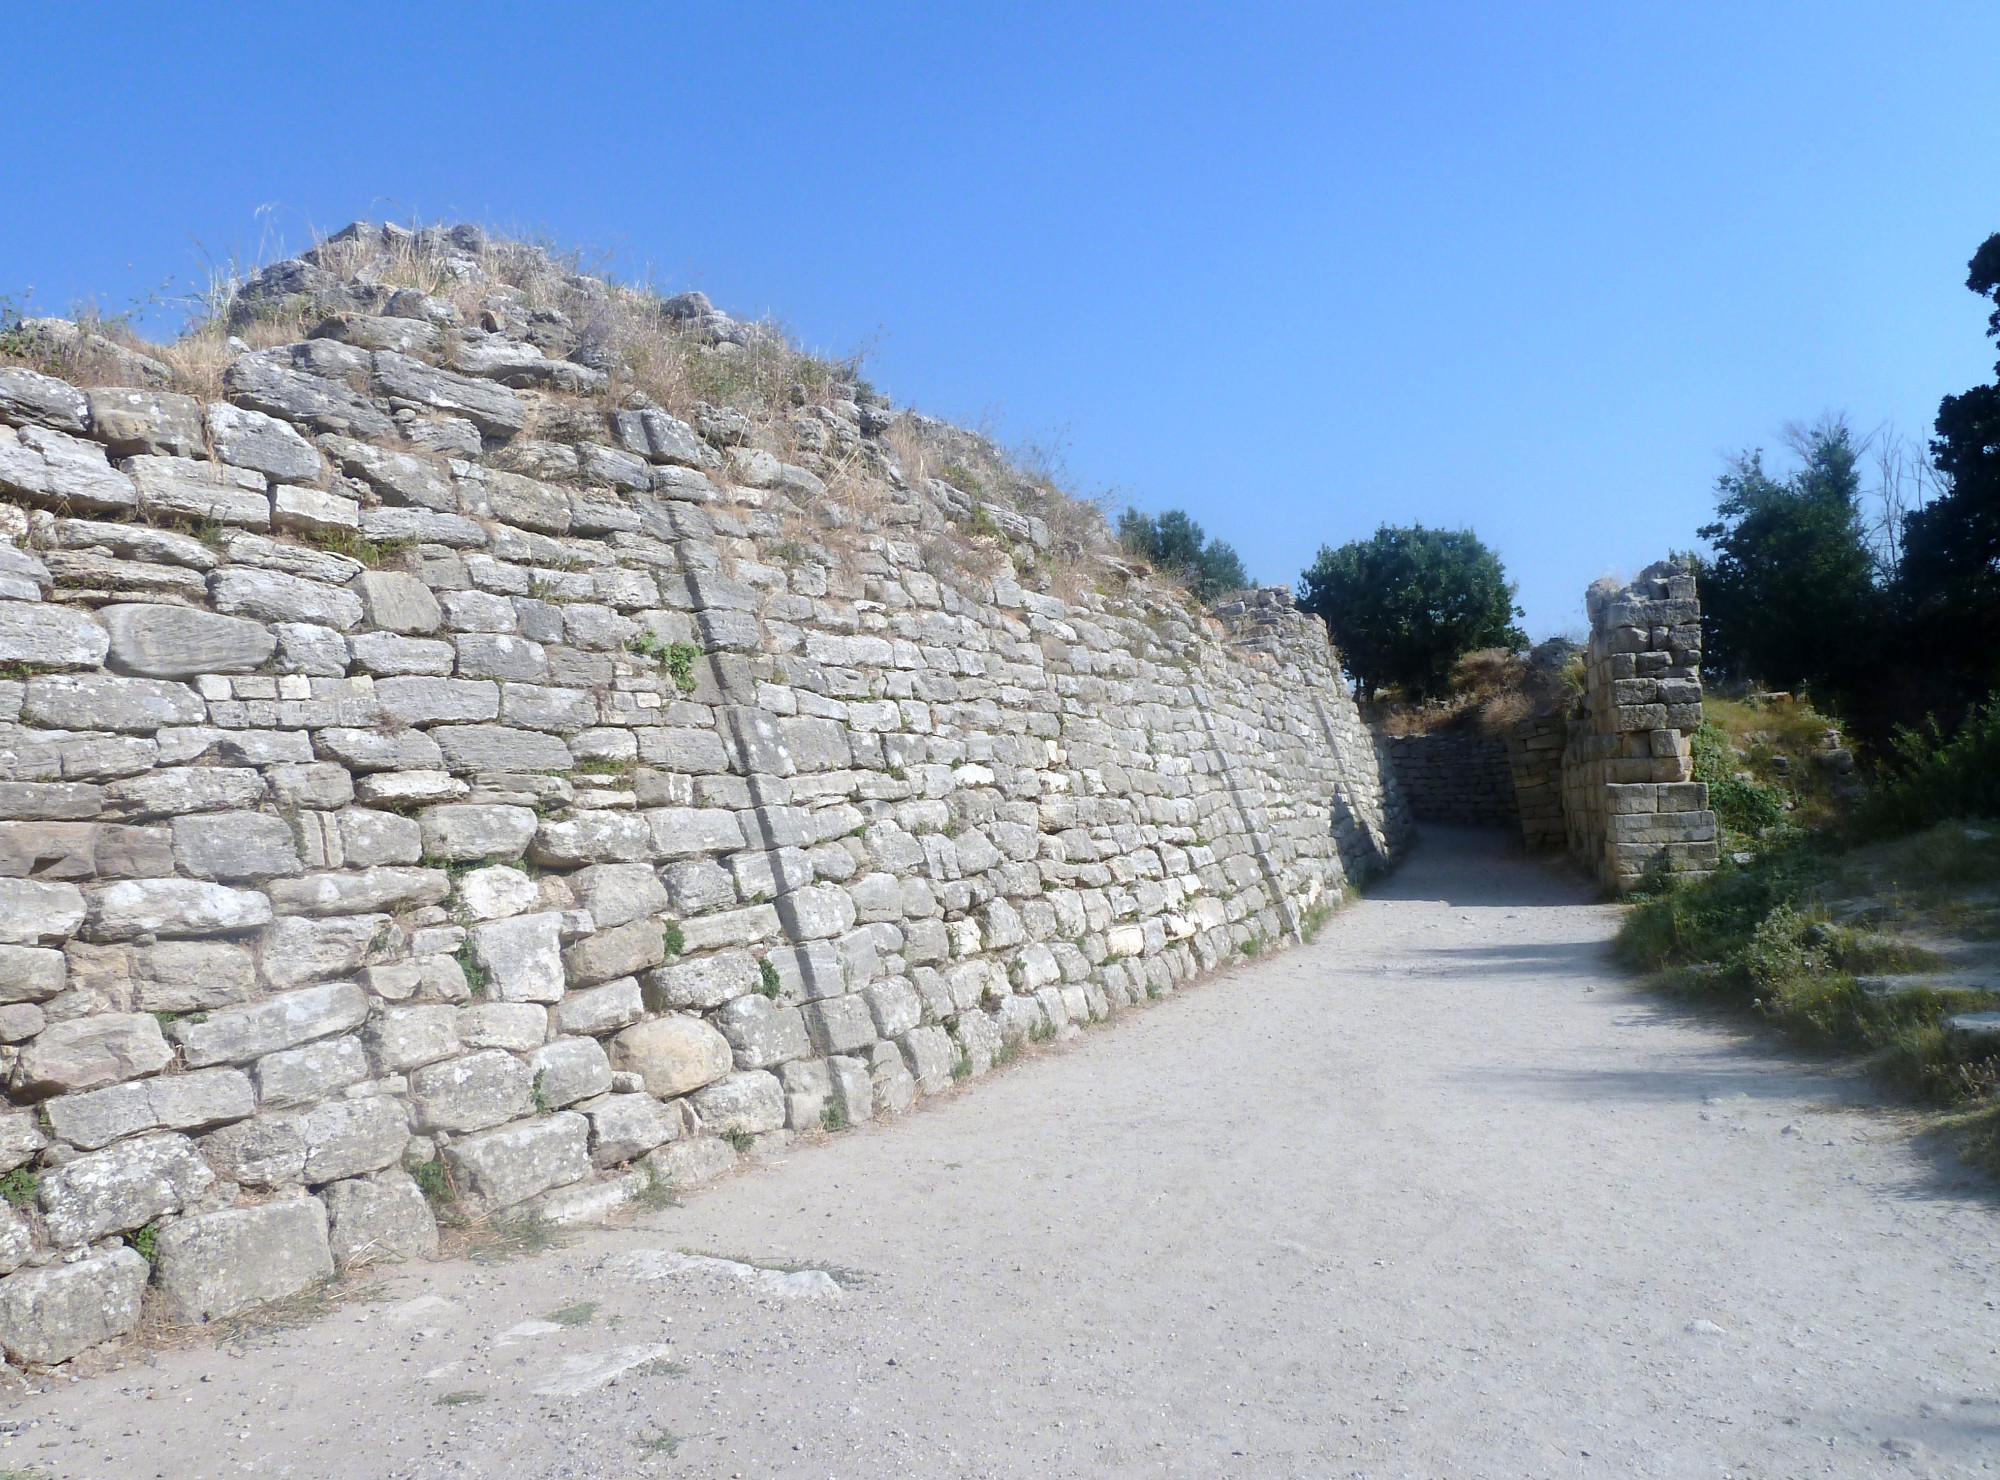 archaeological layer of Troy VII that chronologically spans from c. 1300 to c. 950 BC